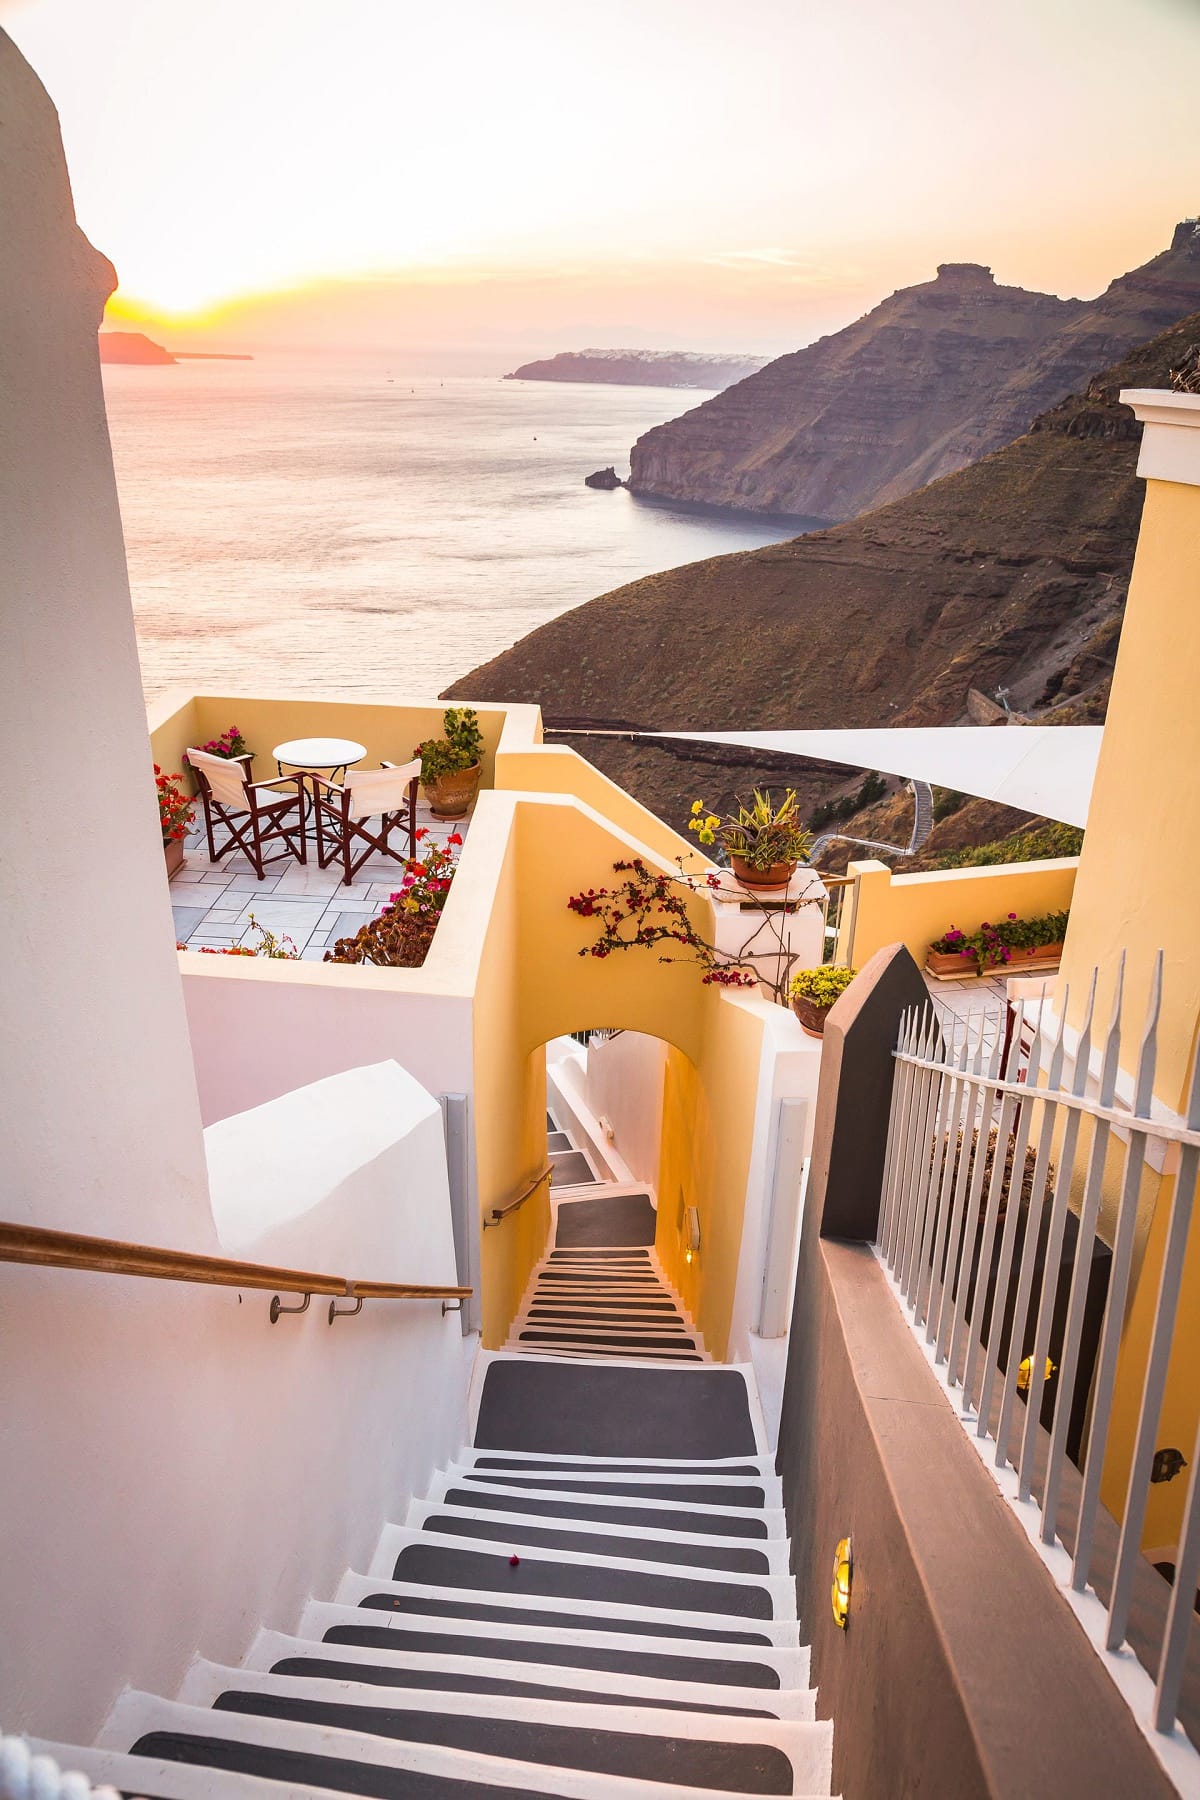 How to legally elope in Santorini